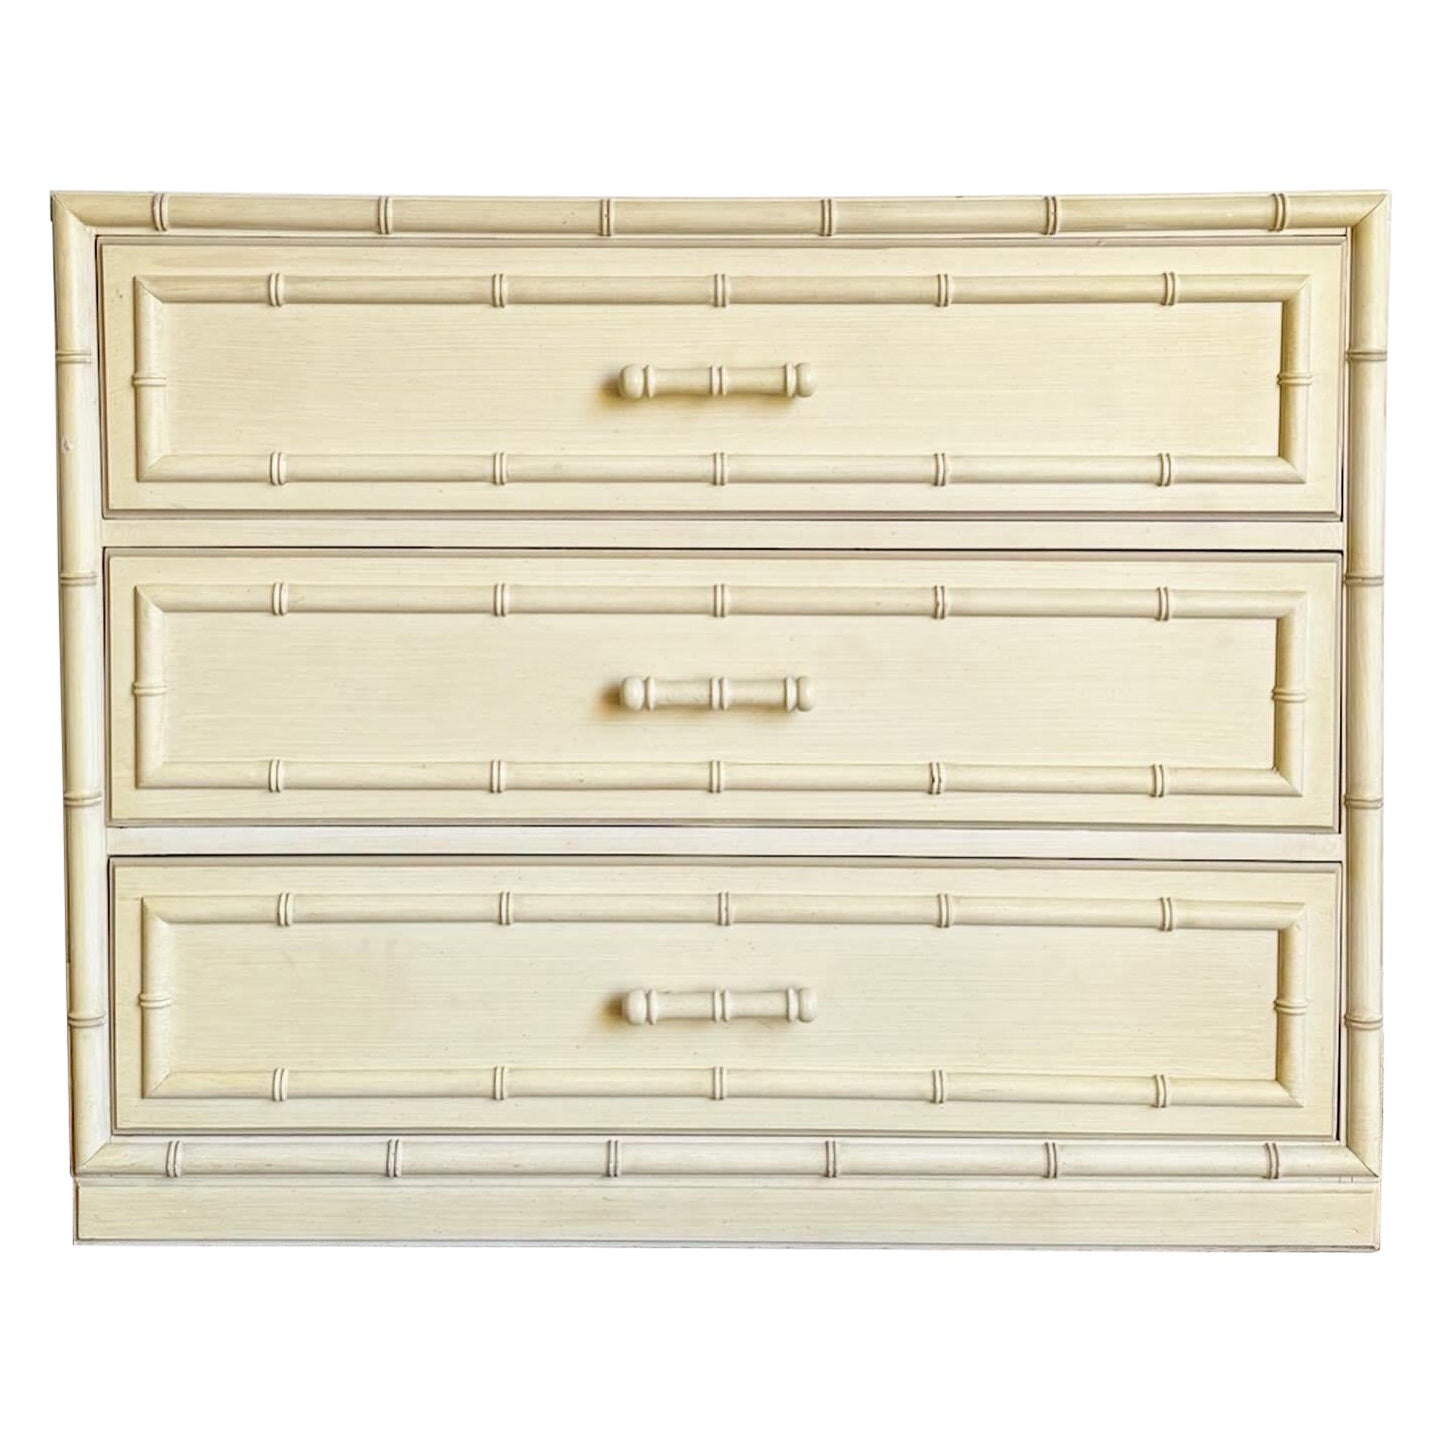 Regency Chic "Aloha" Chest of Drawers by Dixie - 3 Drawers